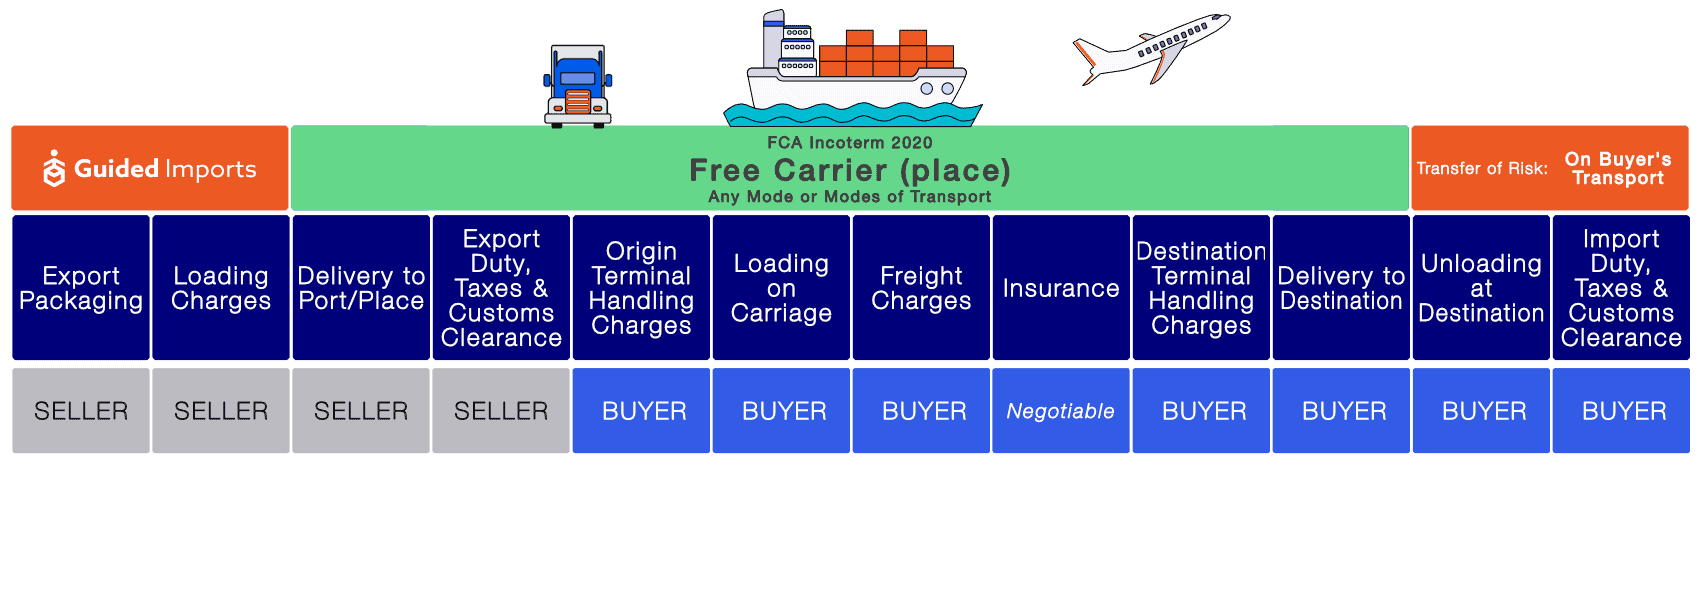 What does it mean when a package is transferred to another carrier for delivery?